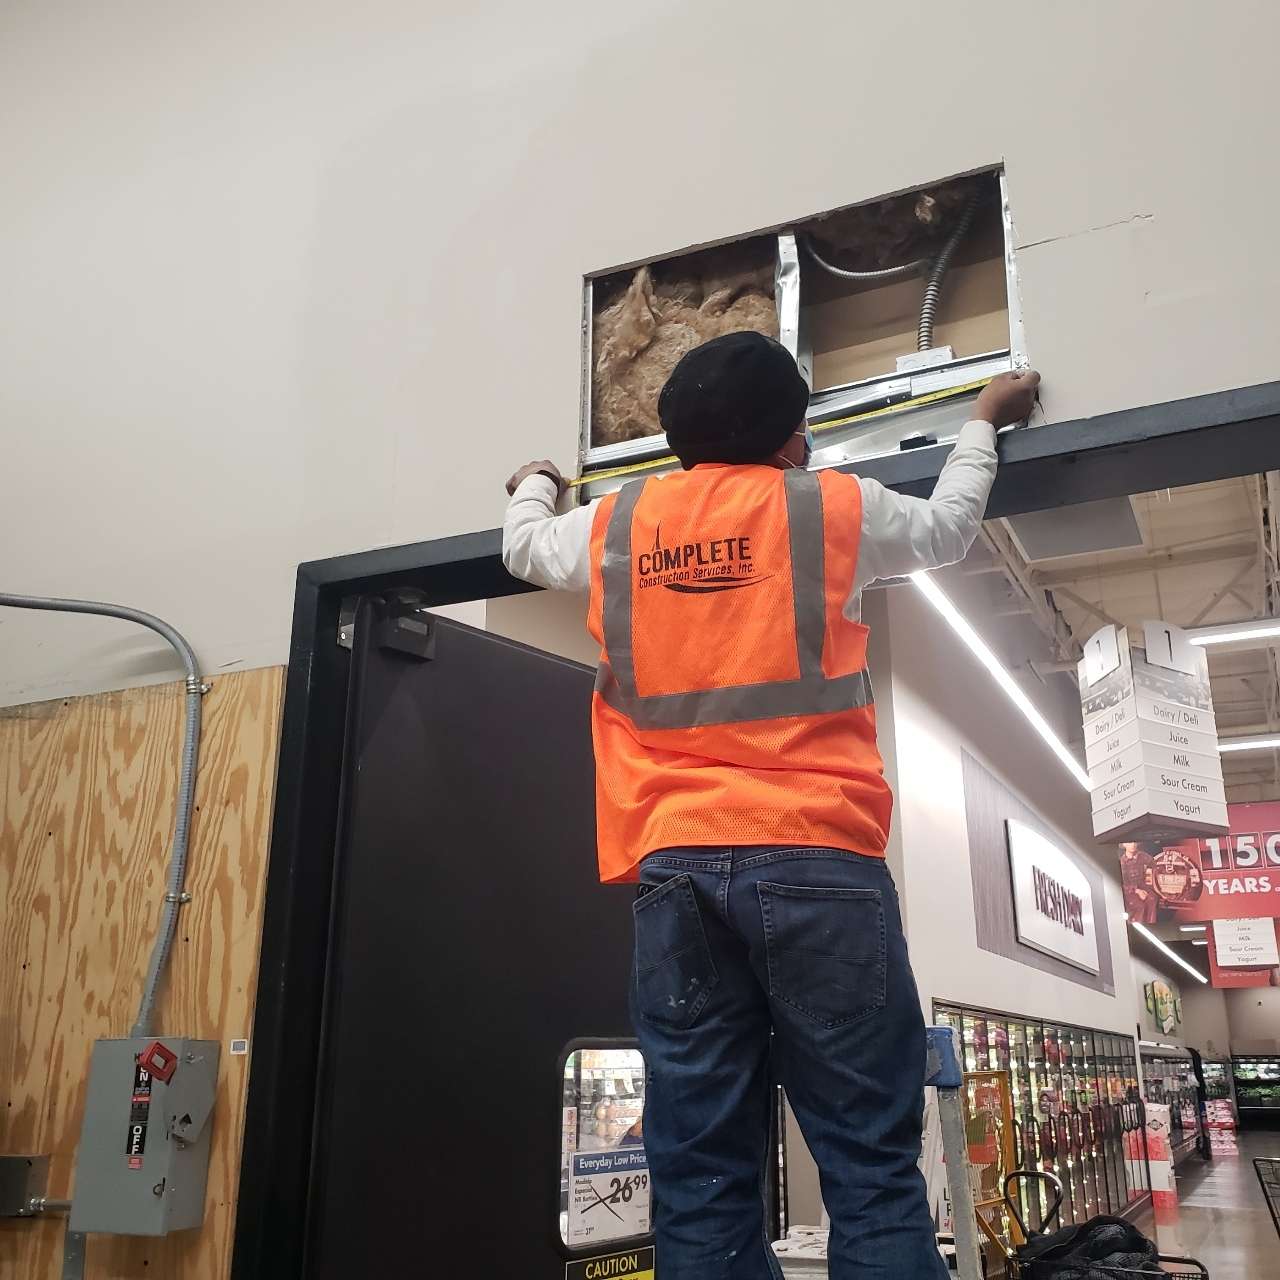 person fixing the signage above a grocery